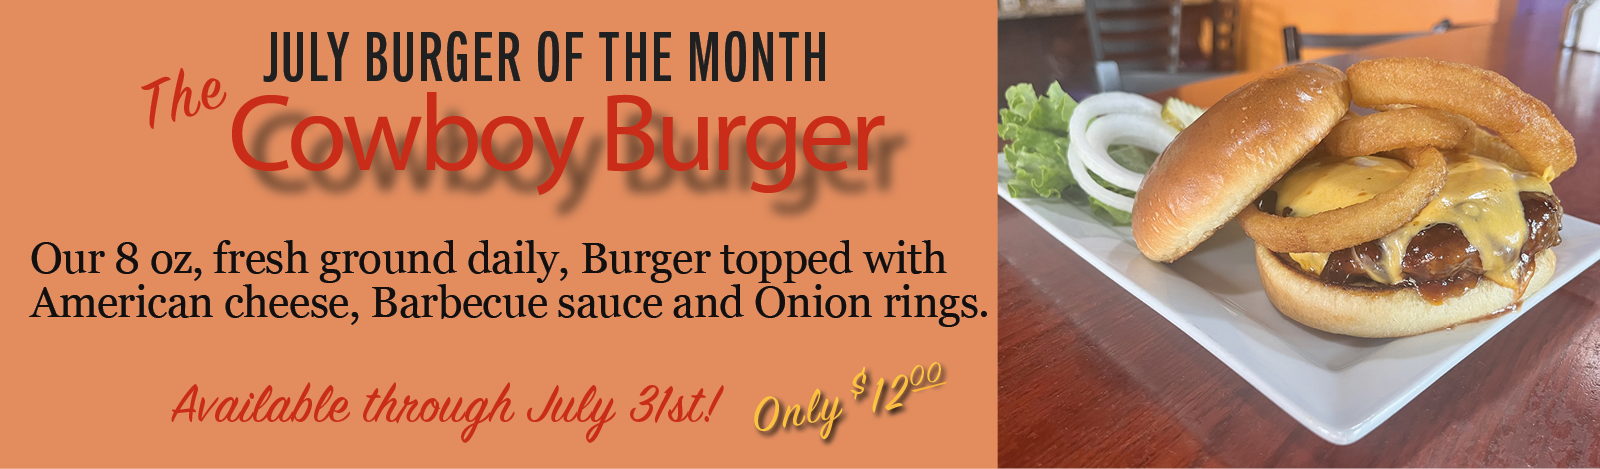 Burger of the Month Taos